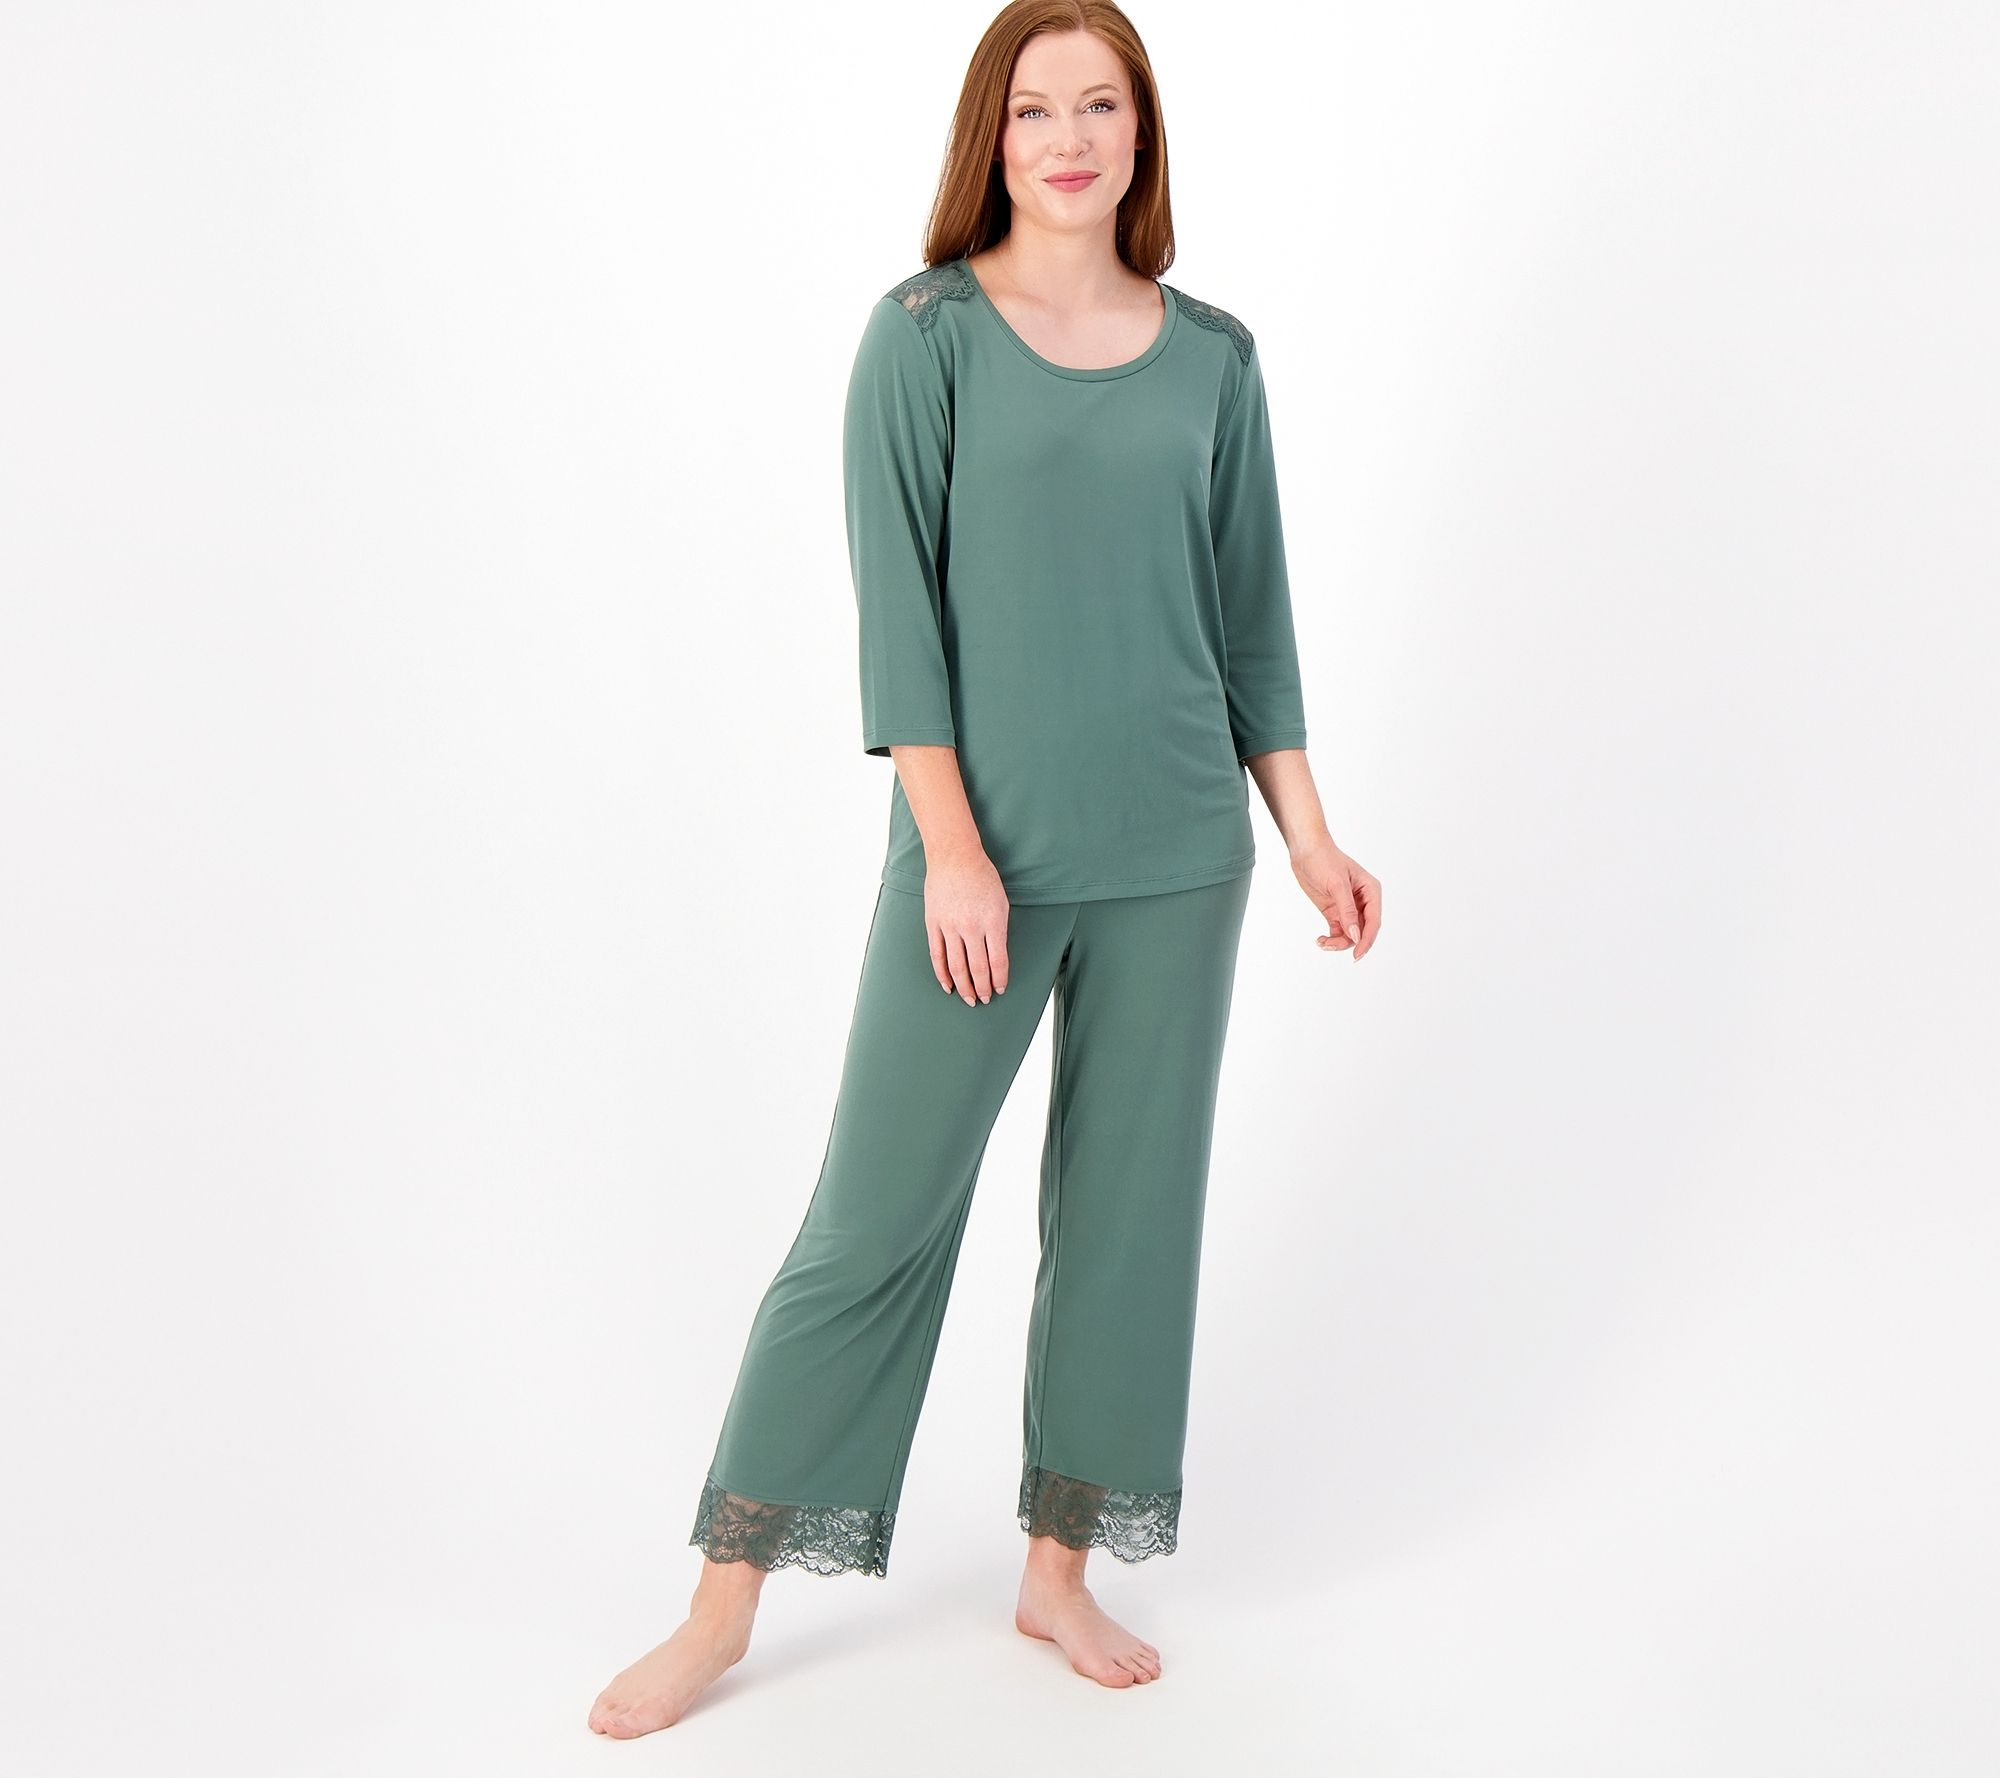 Statement Sleepwear: Luxurious Pajamas And Slips For Lounging At Home